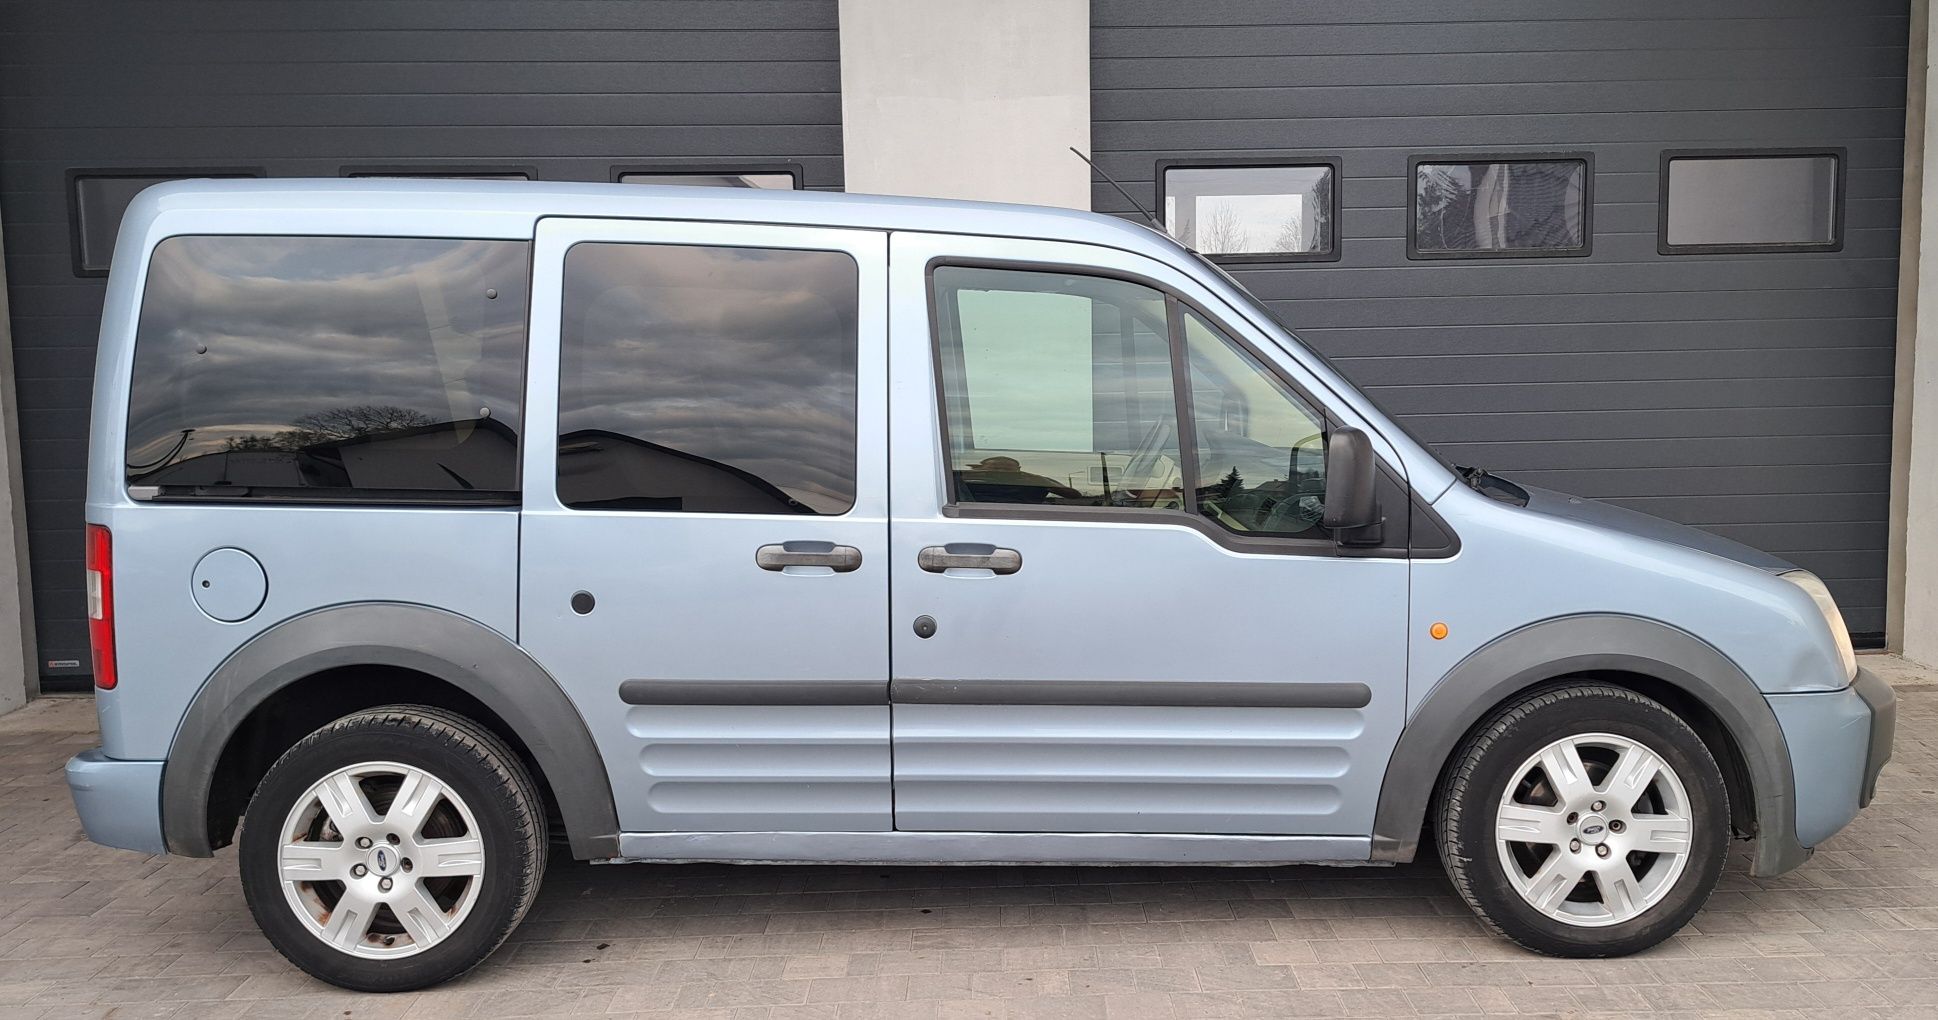 Ford Tourneo Connect 1.8 Tdci diesel osobowy zamiana